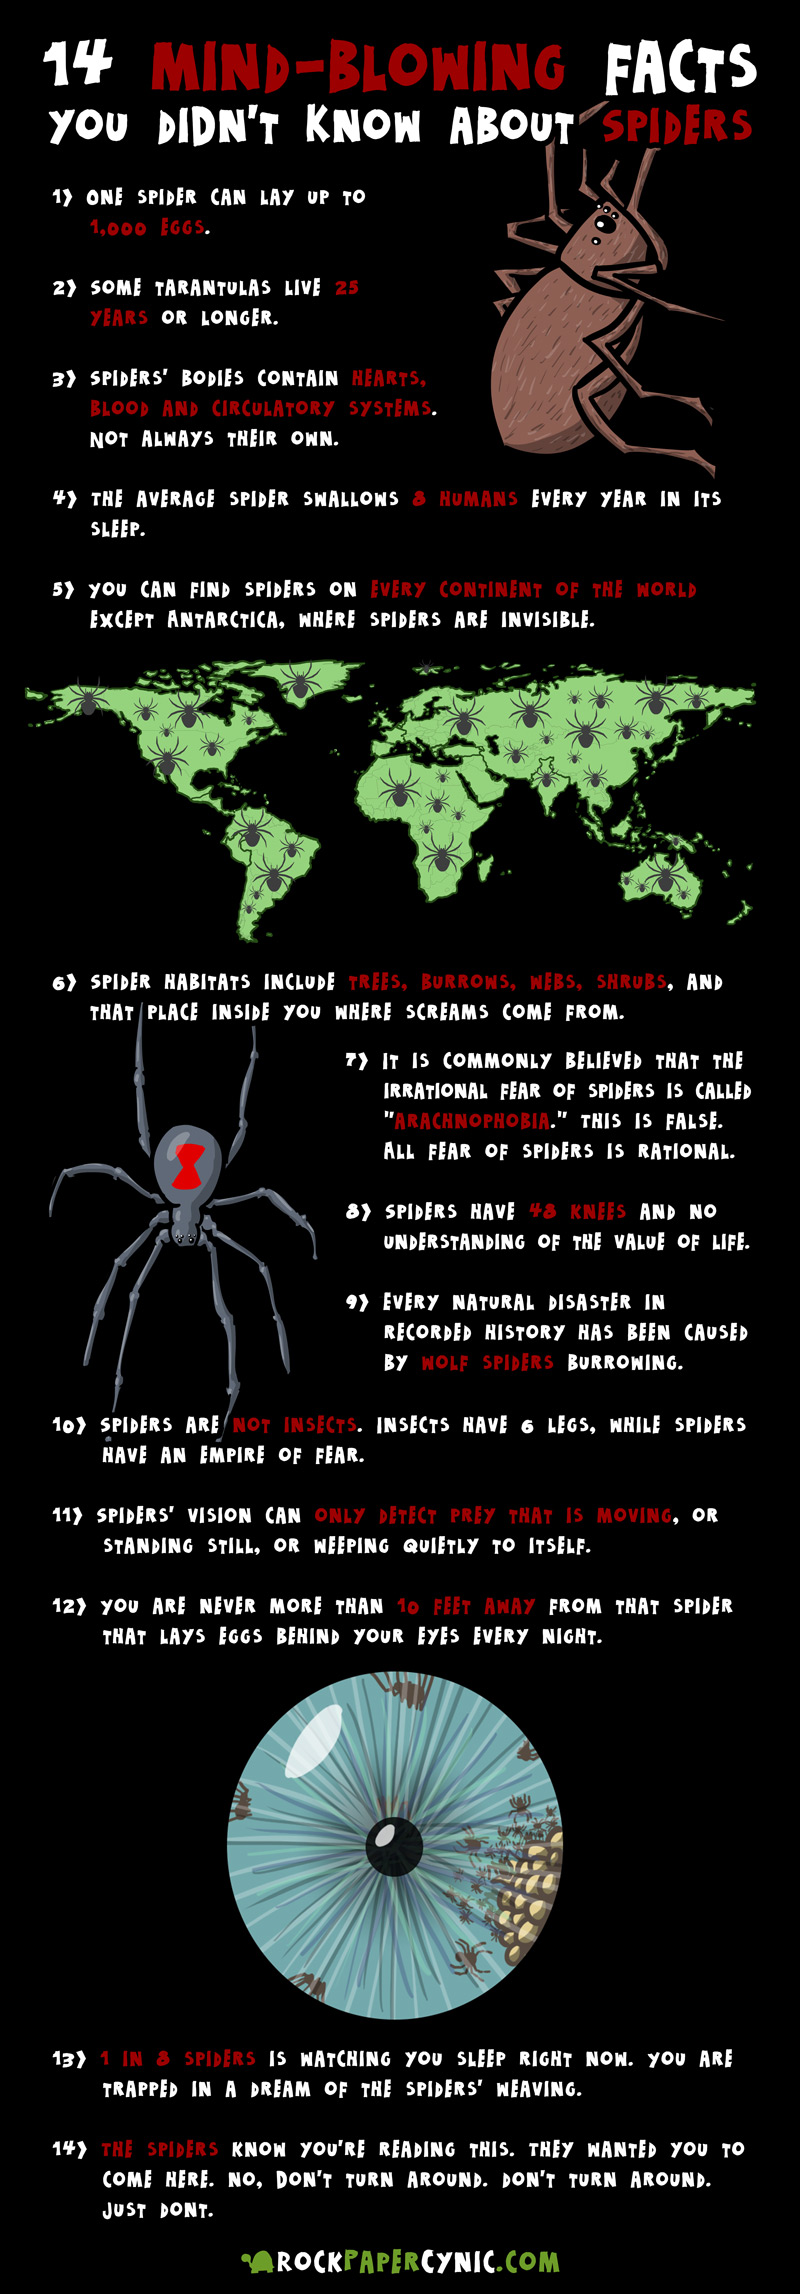 we share crazy, wacky, and little-known facts about spiders! WOW!